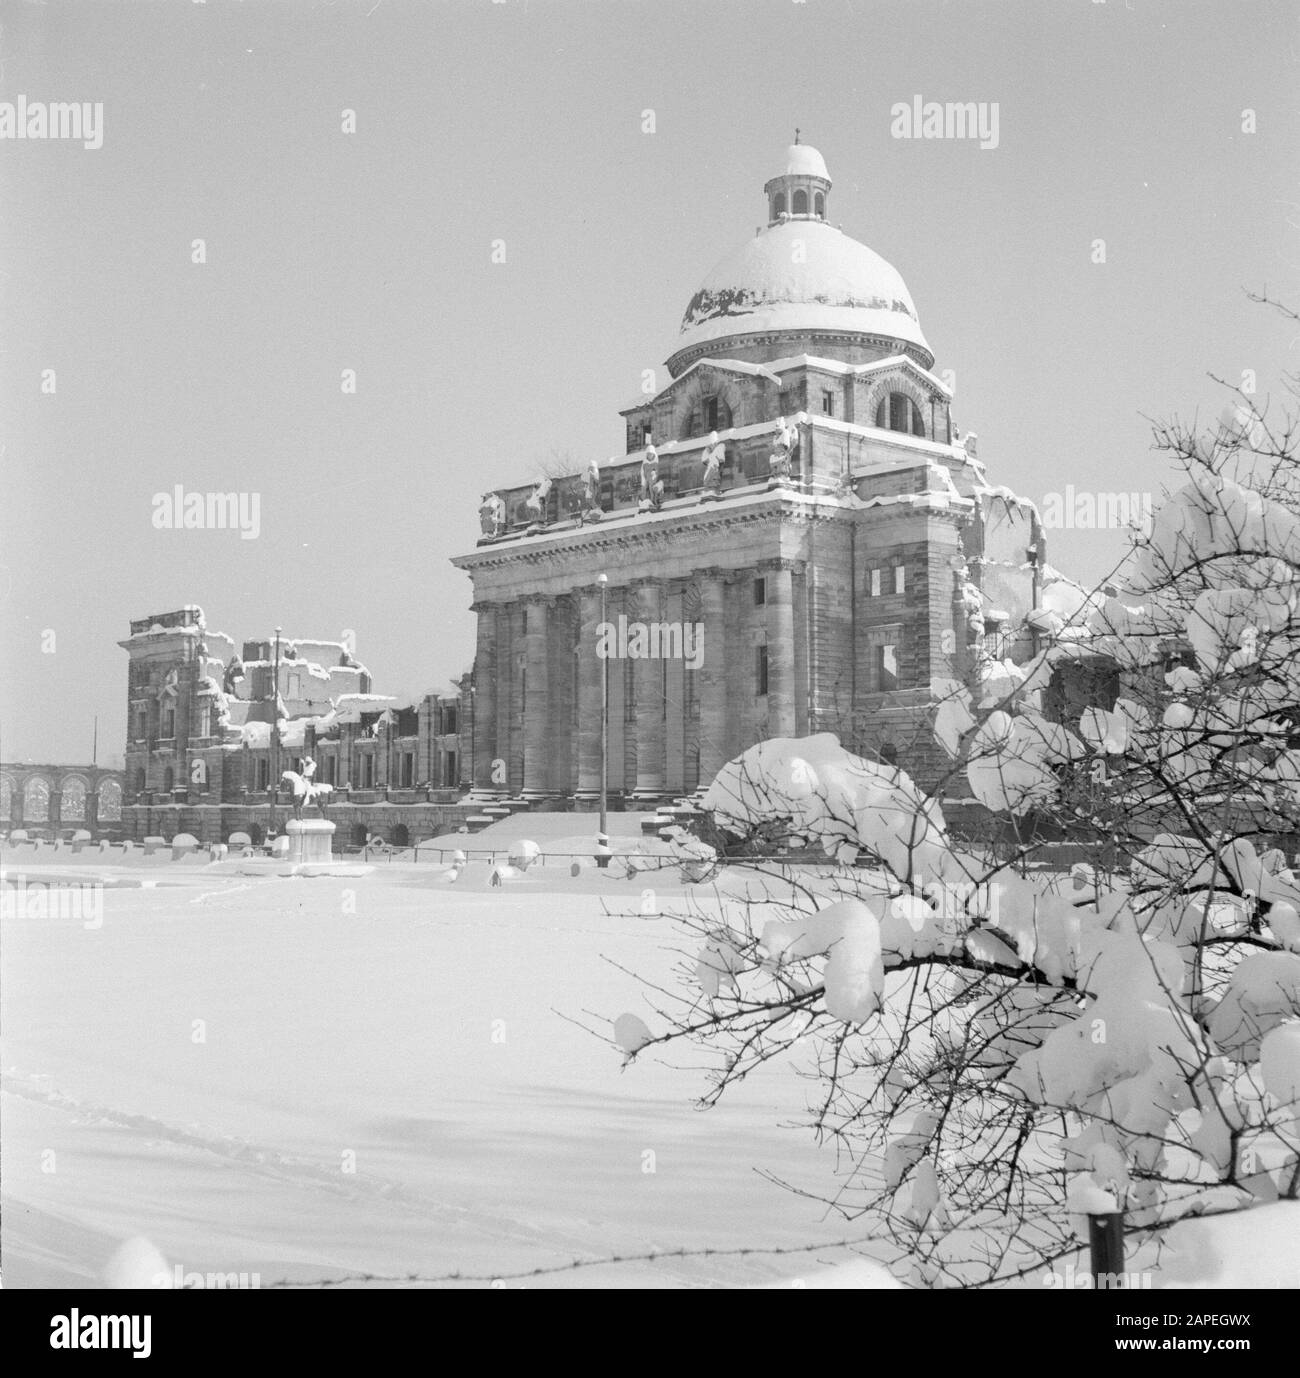 Visit to Munich Description: Snowy Hofgarten with the ruins of the Bayerische Staatskanzlei Date: December 1, 1958 Location: Bavaria, Germany, Munich, West Germany Keywords: parks, parliament buildings, ruins, snow, winter Stock Photo